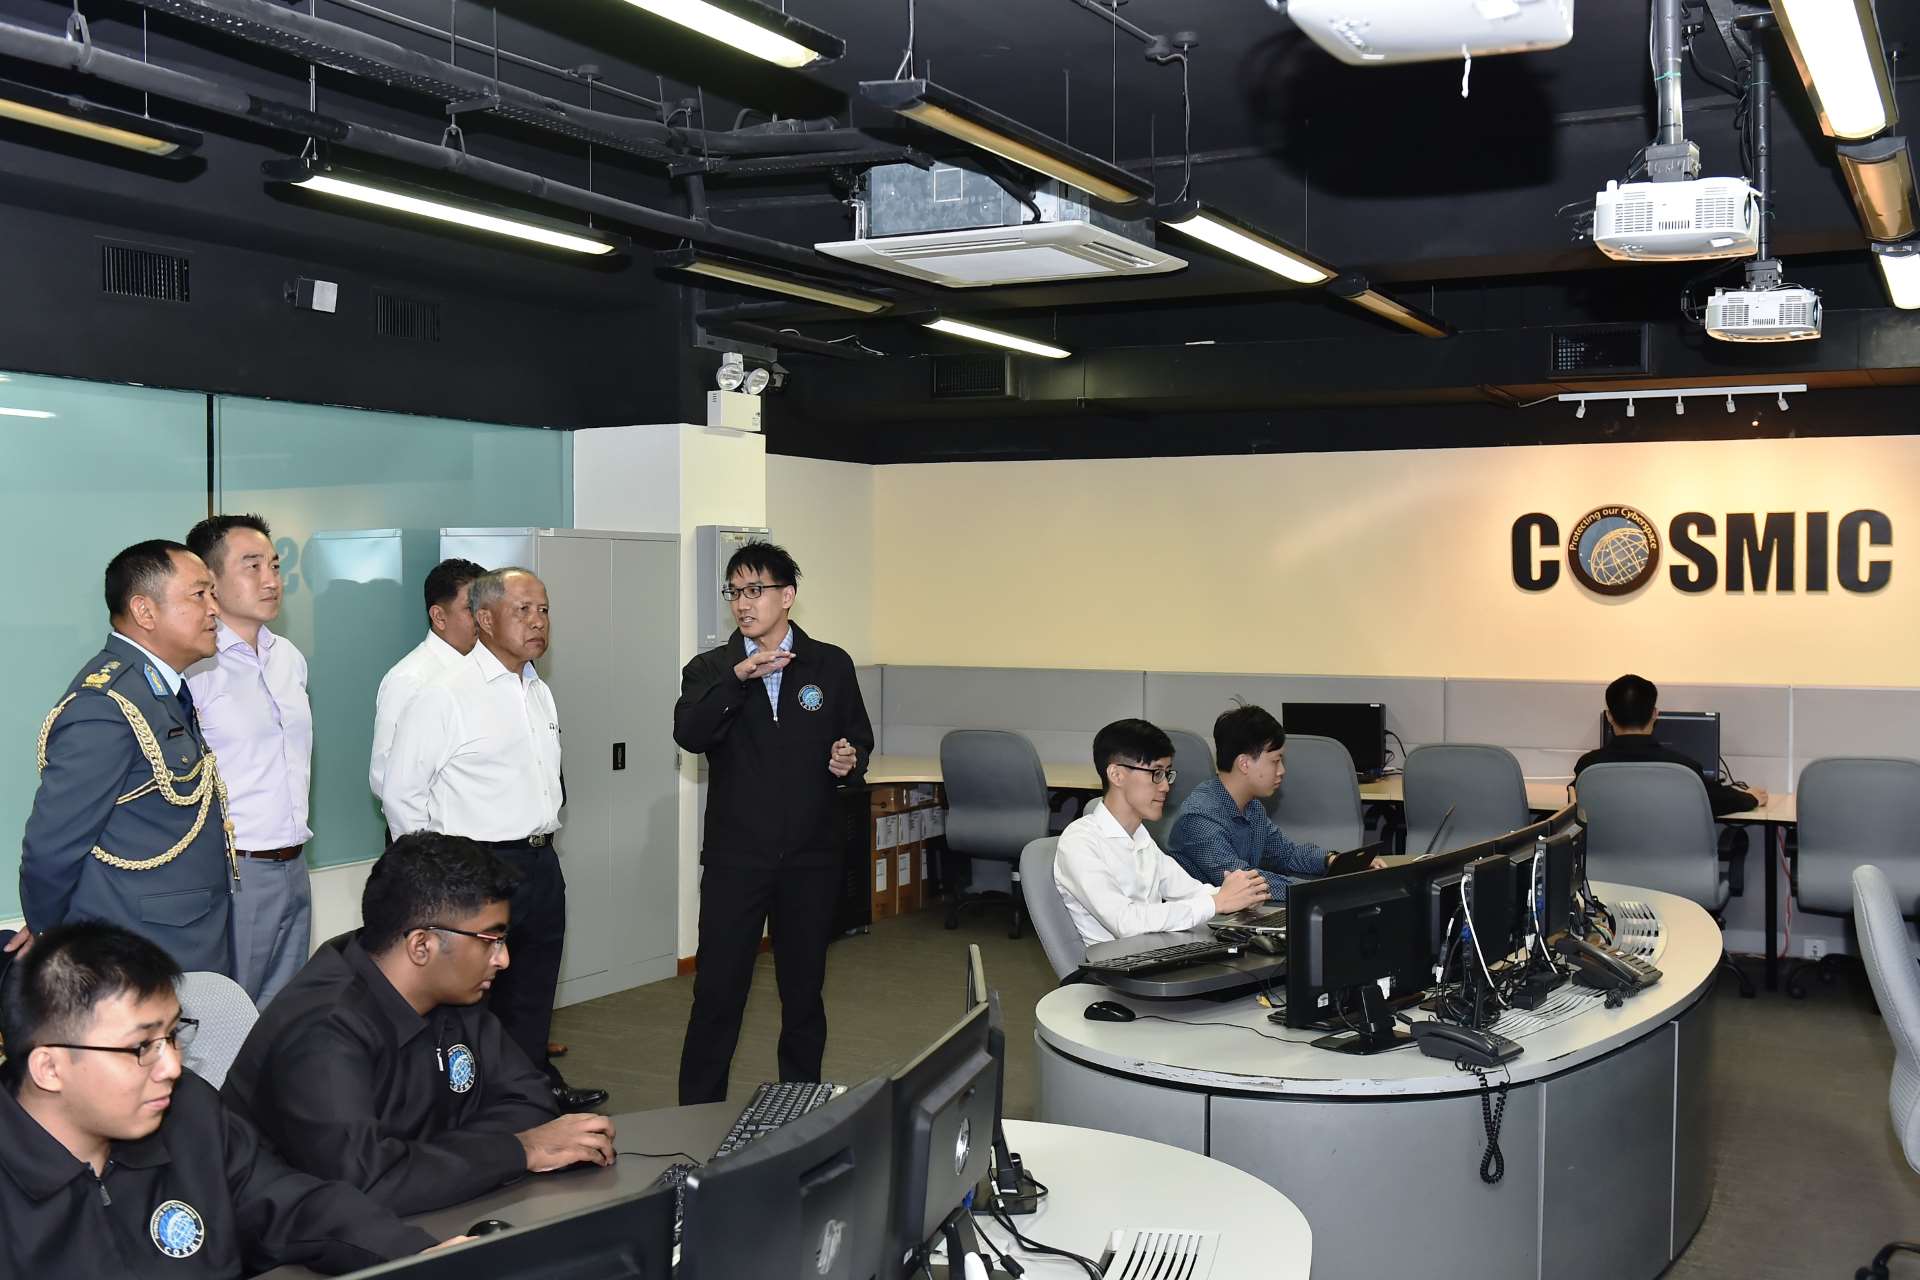 Pehin MG(Rtd) Halbi, accompanied by Director Military Security Brigadier-General Paul Chew, receiving a brief on the cyber security capabilities and operations of the Cybersecurity Operations, Sensing, Monitoring and Investigation Centre (COSMIC).